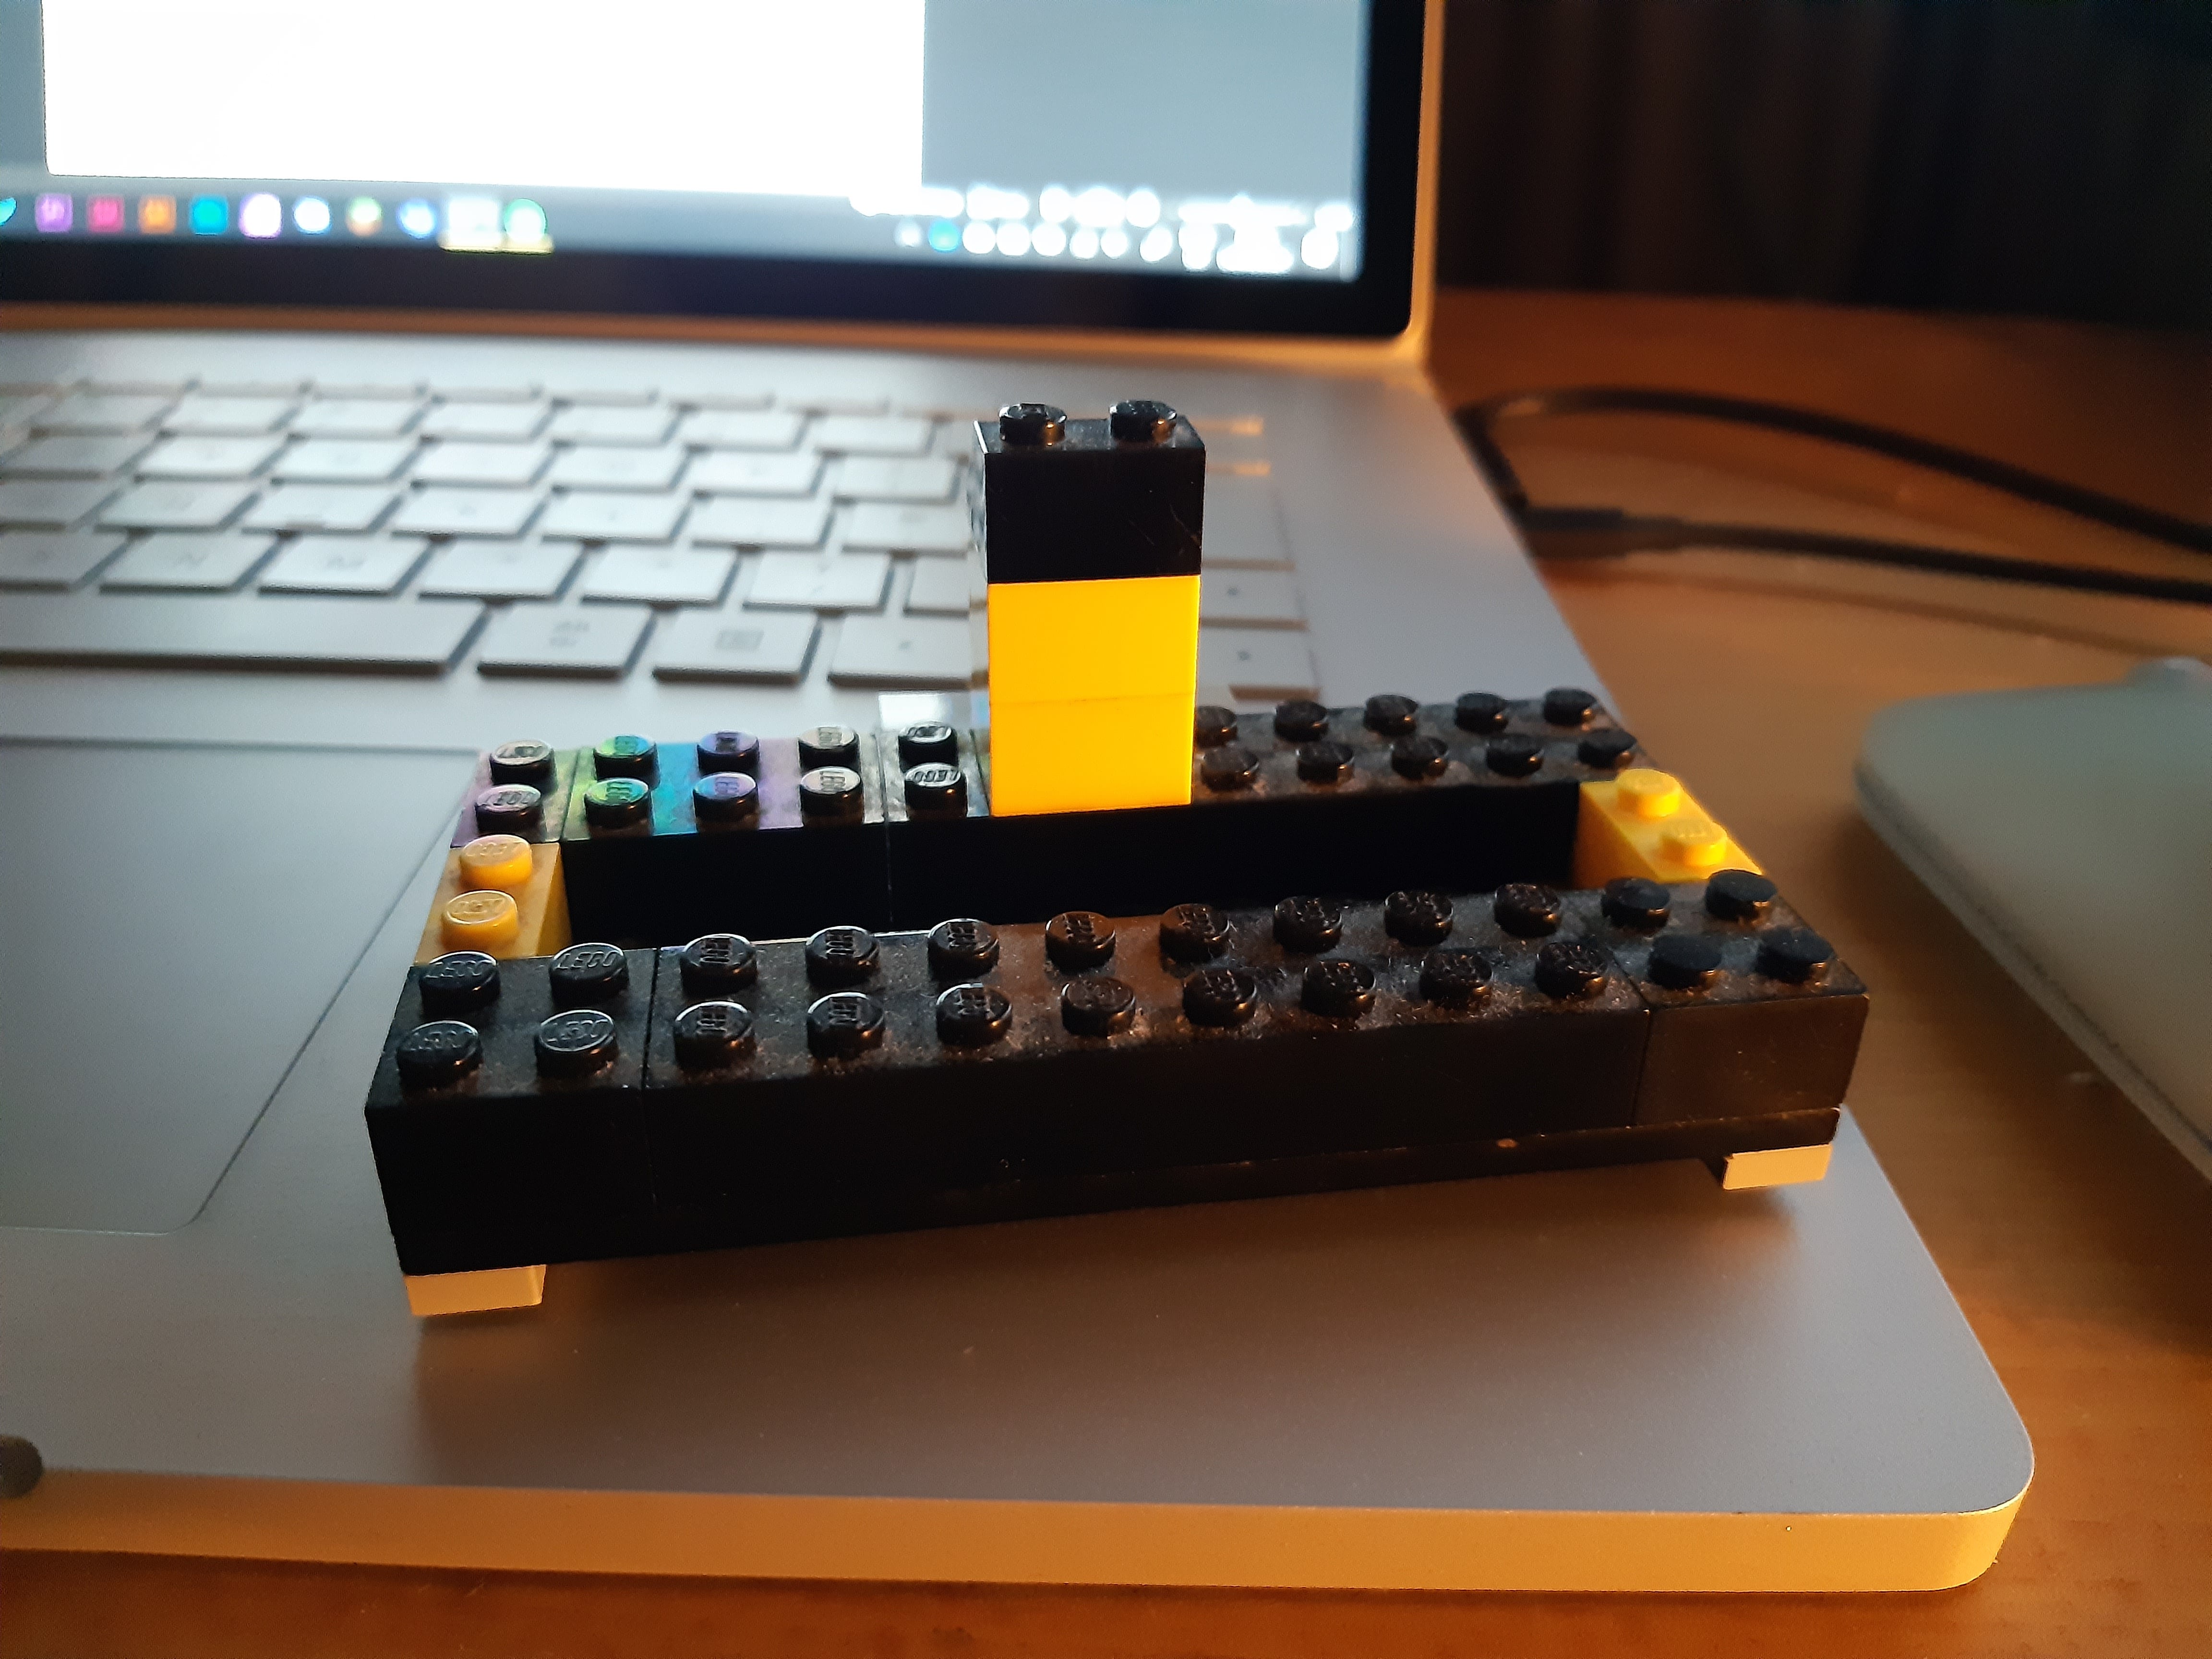 Phone stand made with Lego bricks